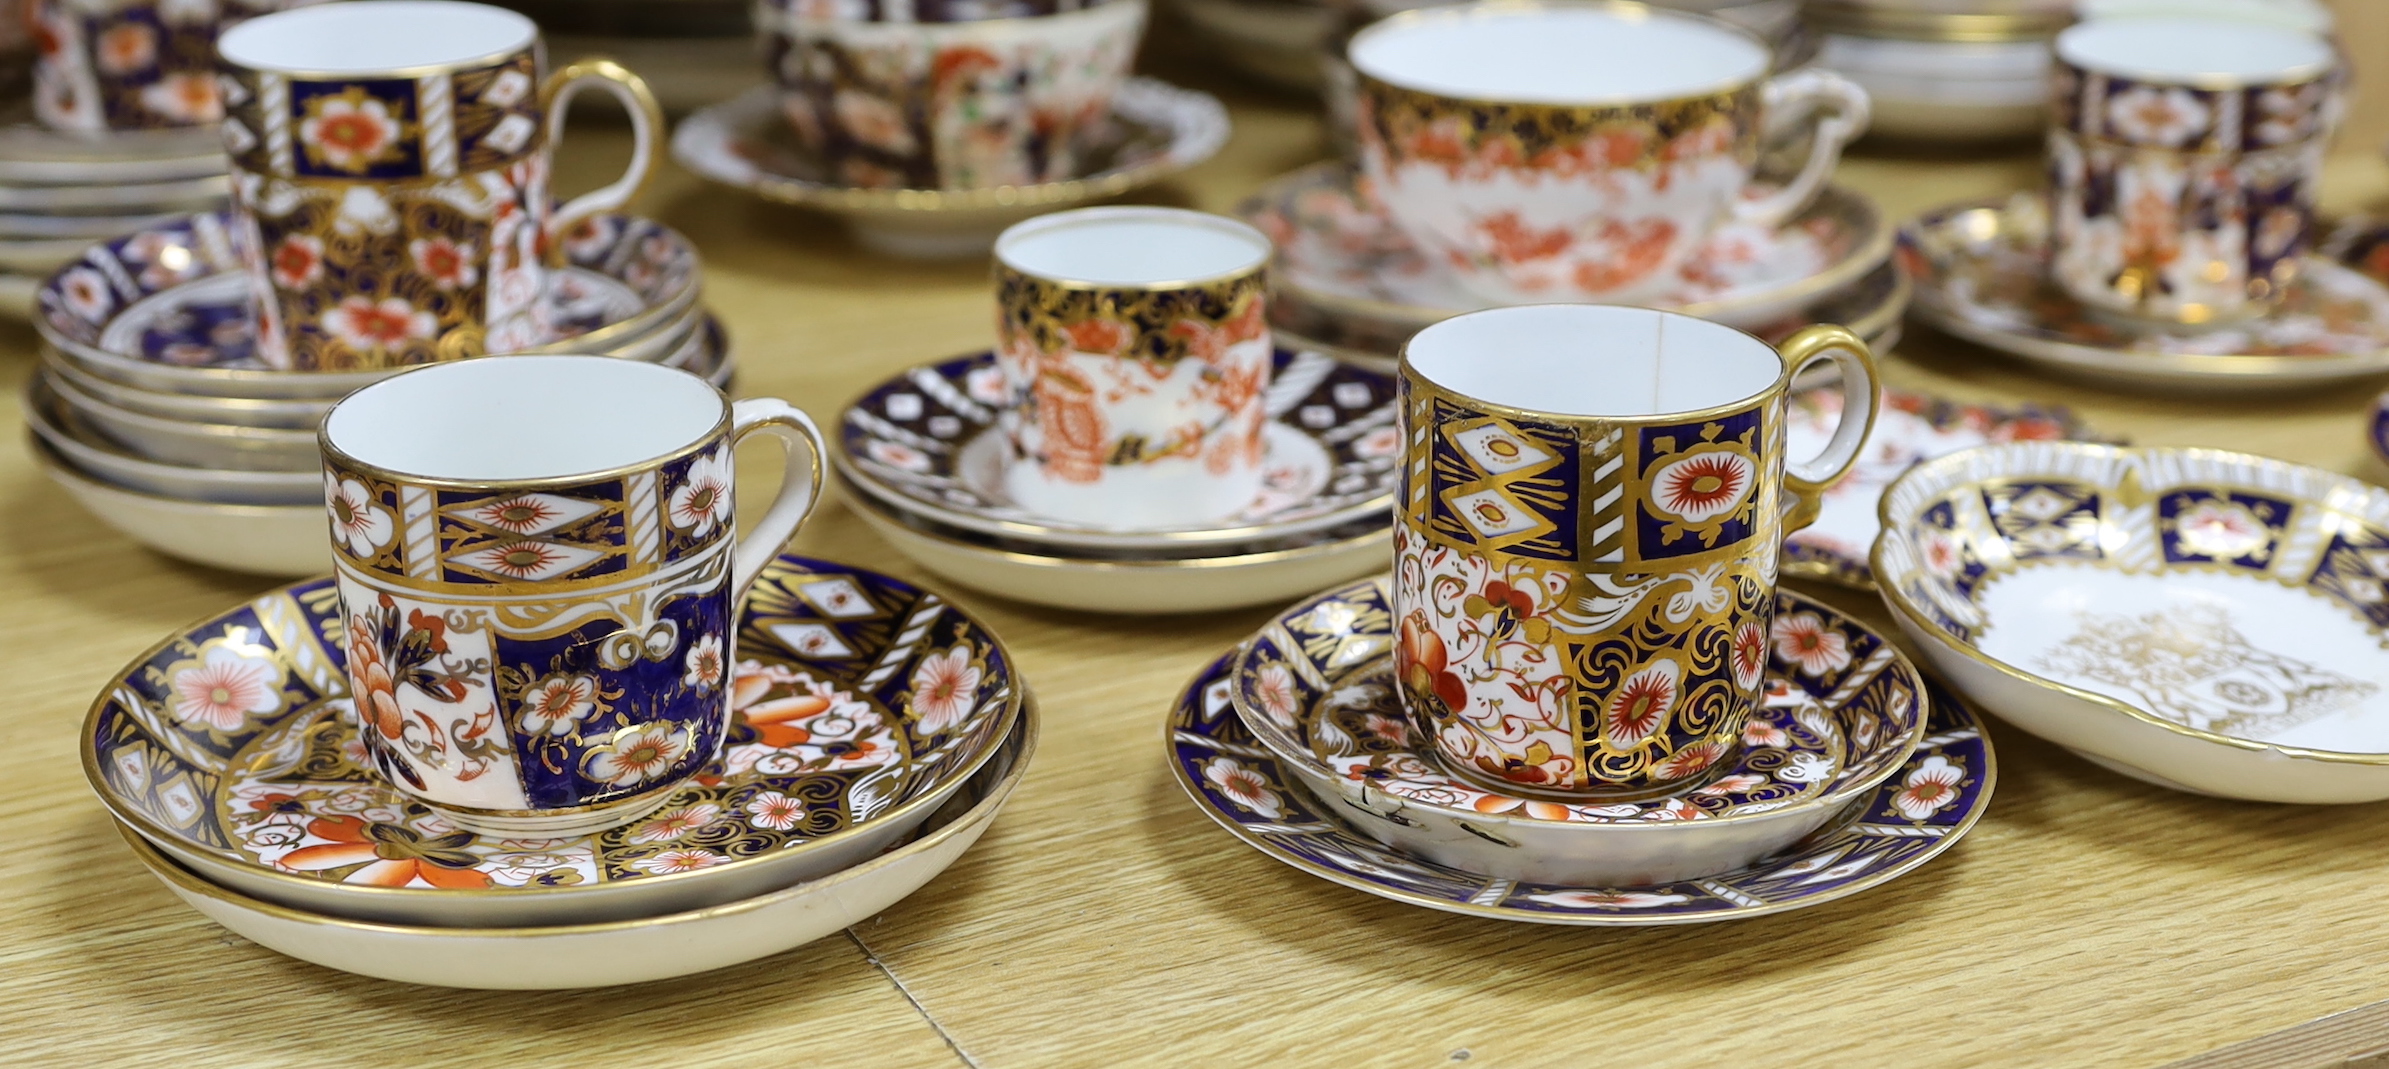 Royal Crown Derby and other Imari pattern tea ware including vases, sandwich plates and trios, several areas of damage